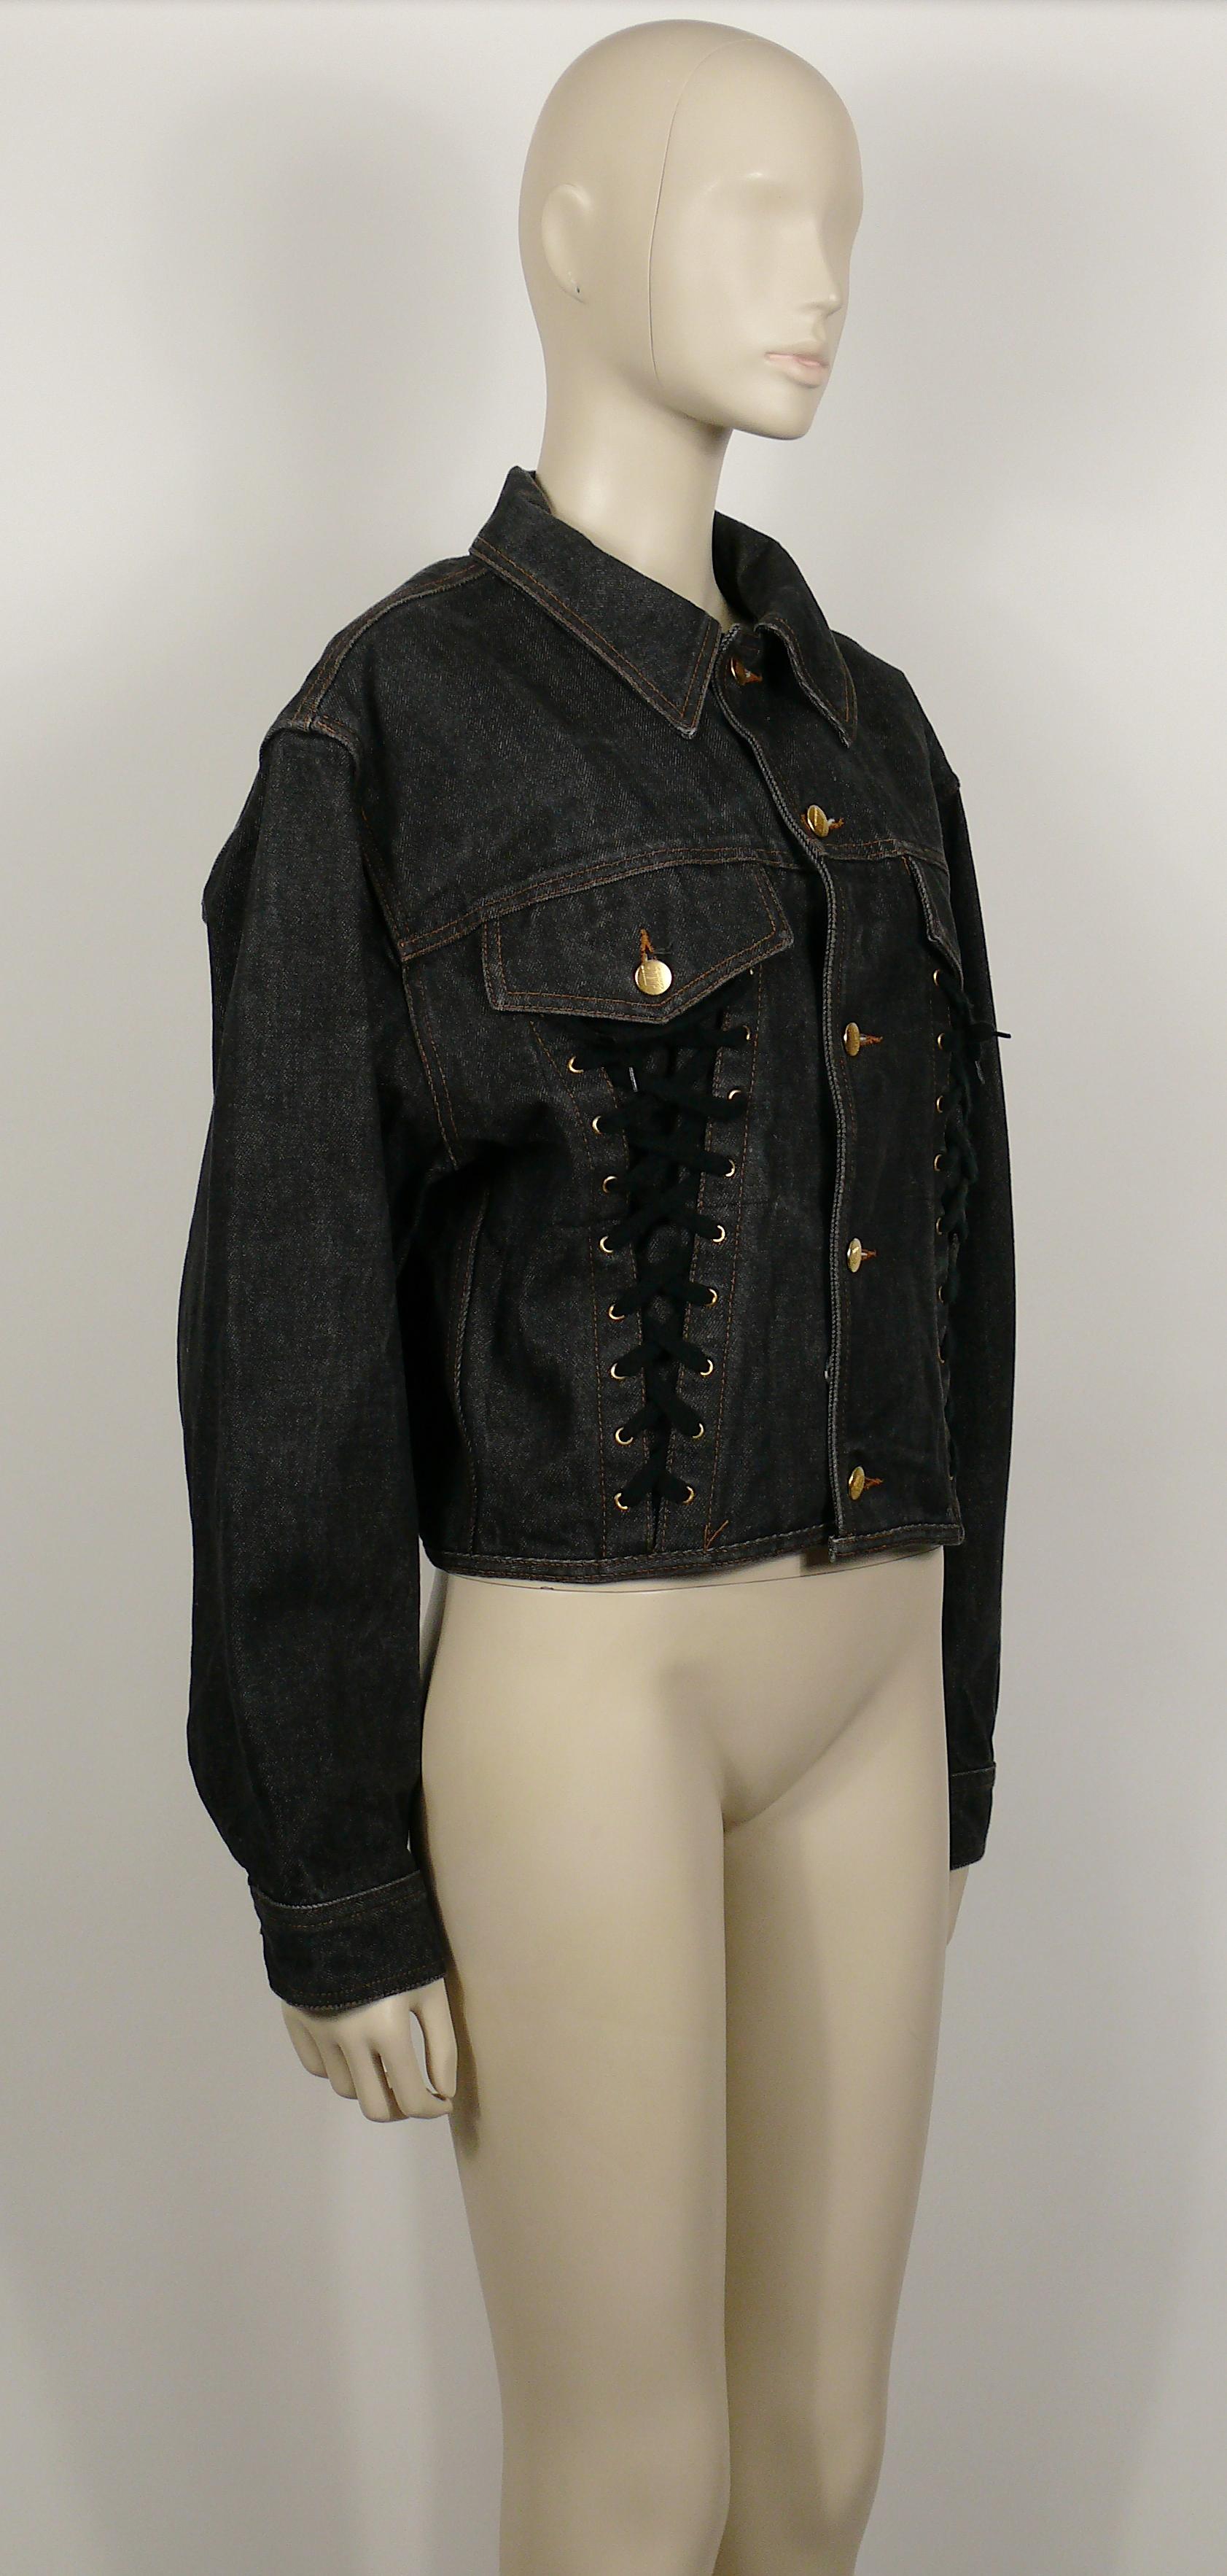 JEAN PAUL GAULTIER Junior vintage black denim iconic corset style jacket.

This jacket features :
- Distressed black denim.
- Classic collar.
- Front button down fastening.
- Front lace up detail.
- Long sleeves with button cuffs
- Pocket detail at